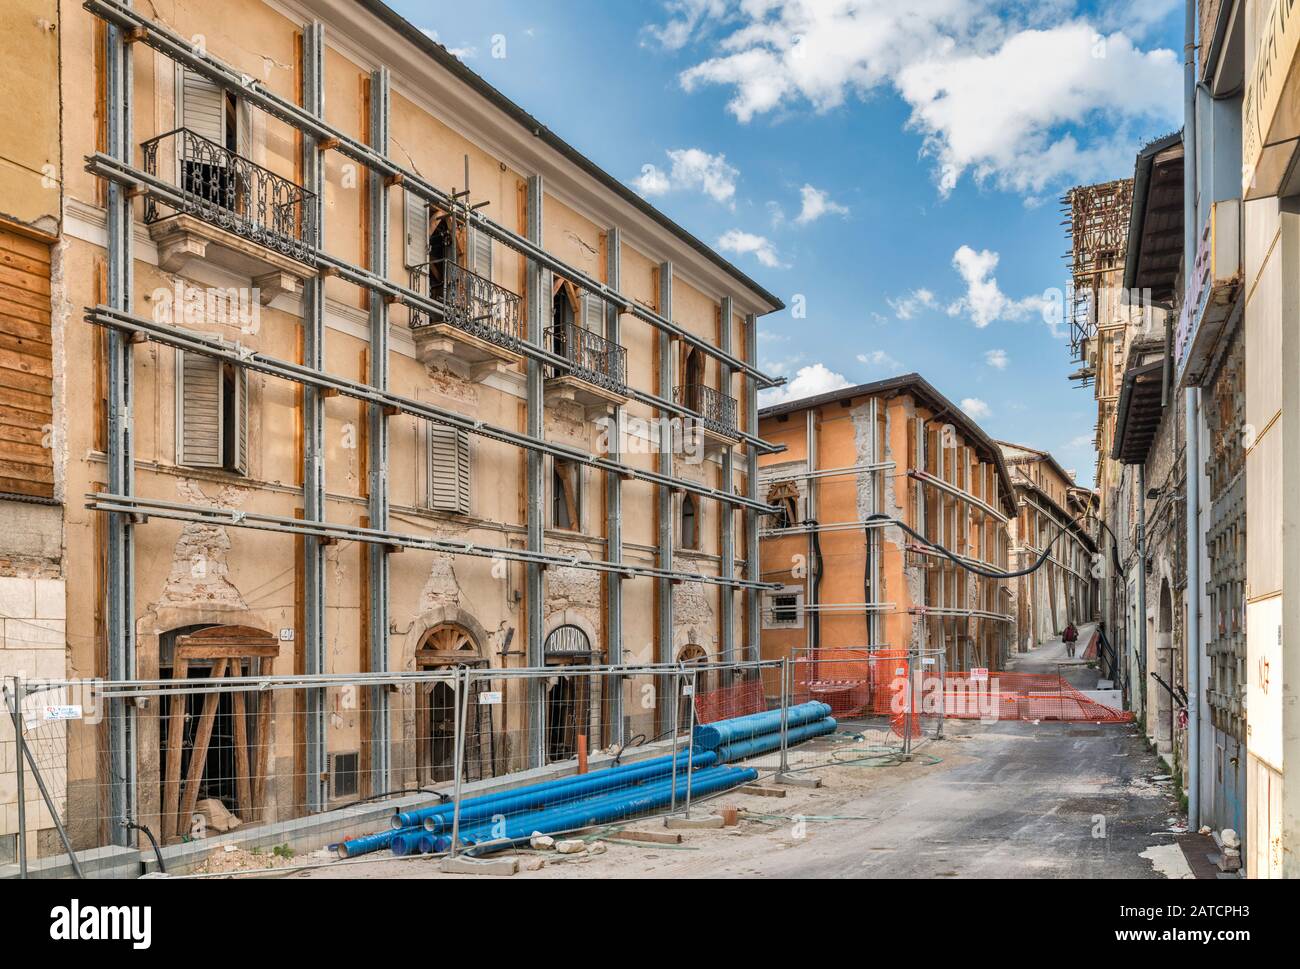 Buildings damaged in 2009 L'Aquila Earthquake, protected by metal beams, 2018 view, Piazza Duomo, L'Aquila, Abruzzo, Italy Stock Photo